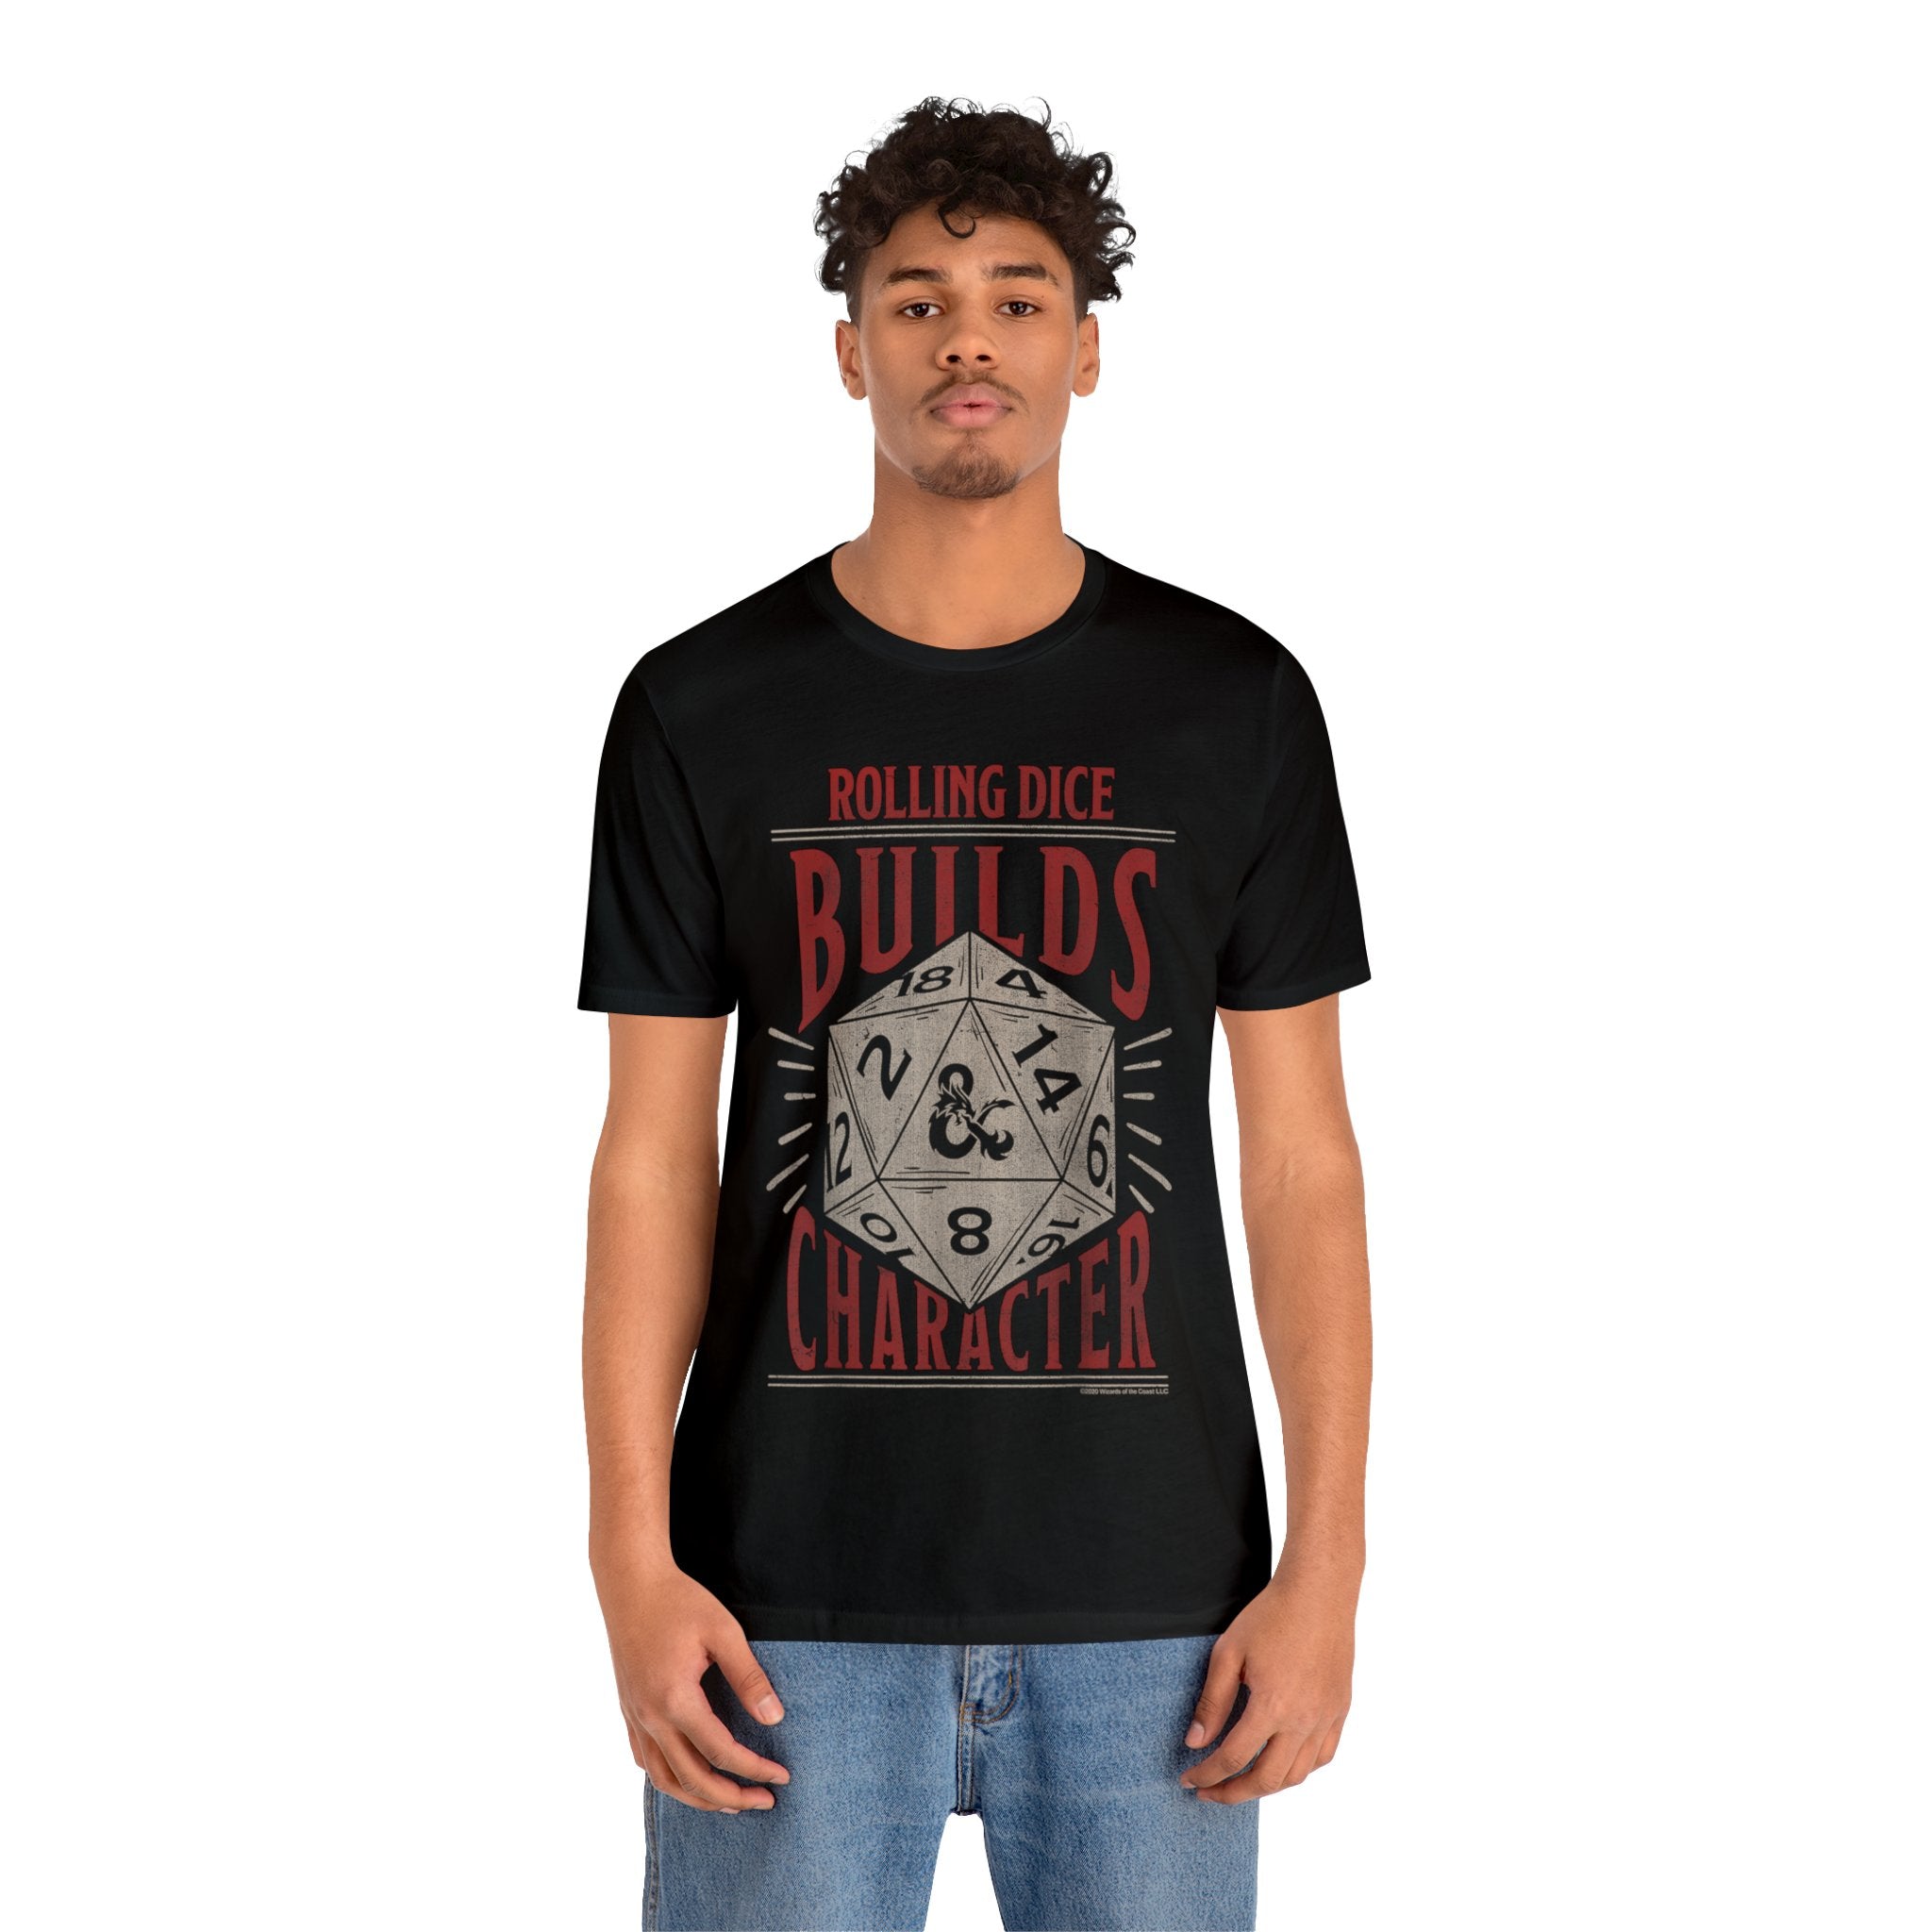 Rolling Dice Builds Character Tee-Shirt builds character on this unisex tee-shirt.